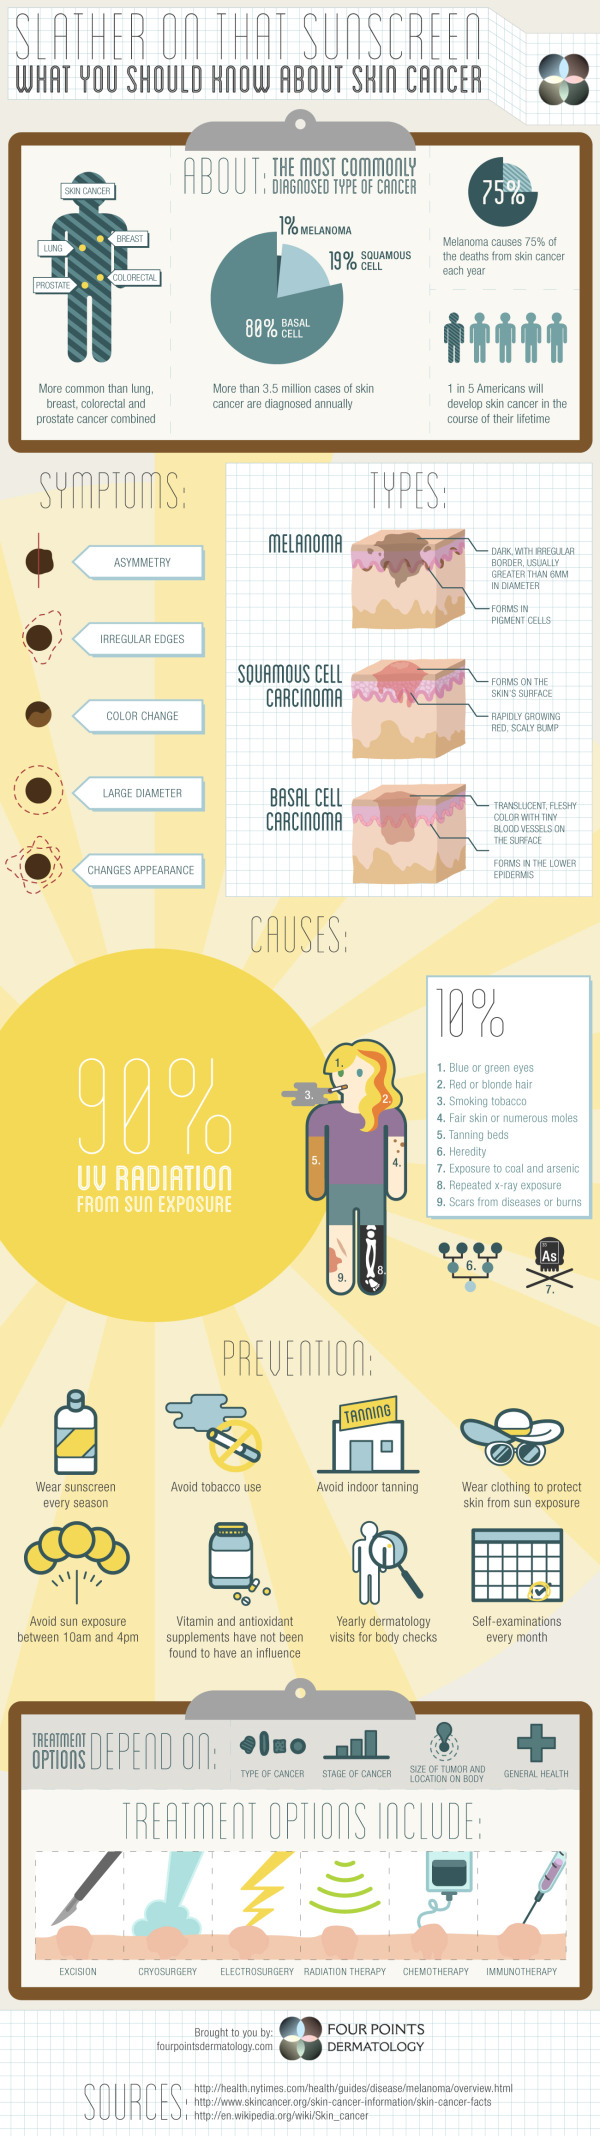 Slather on the Sunscreen: What You Should Know About Skin Cancer infographic